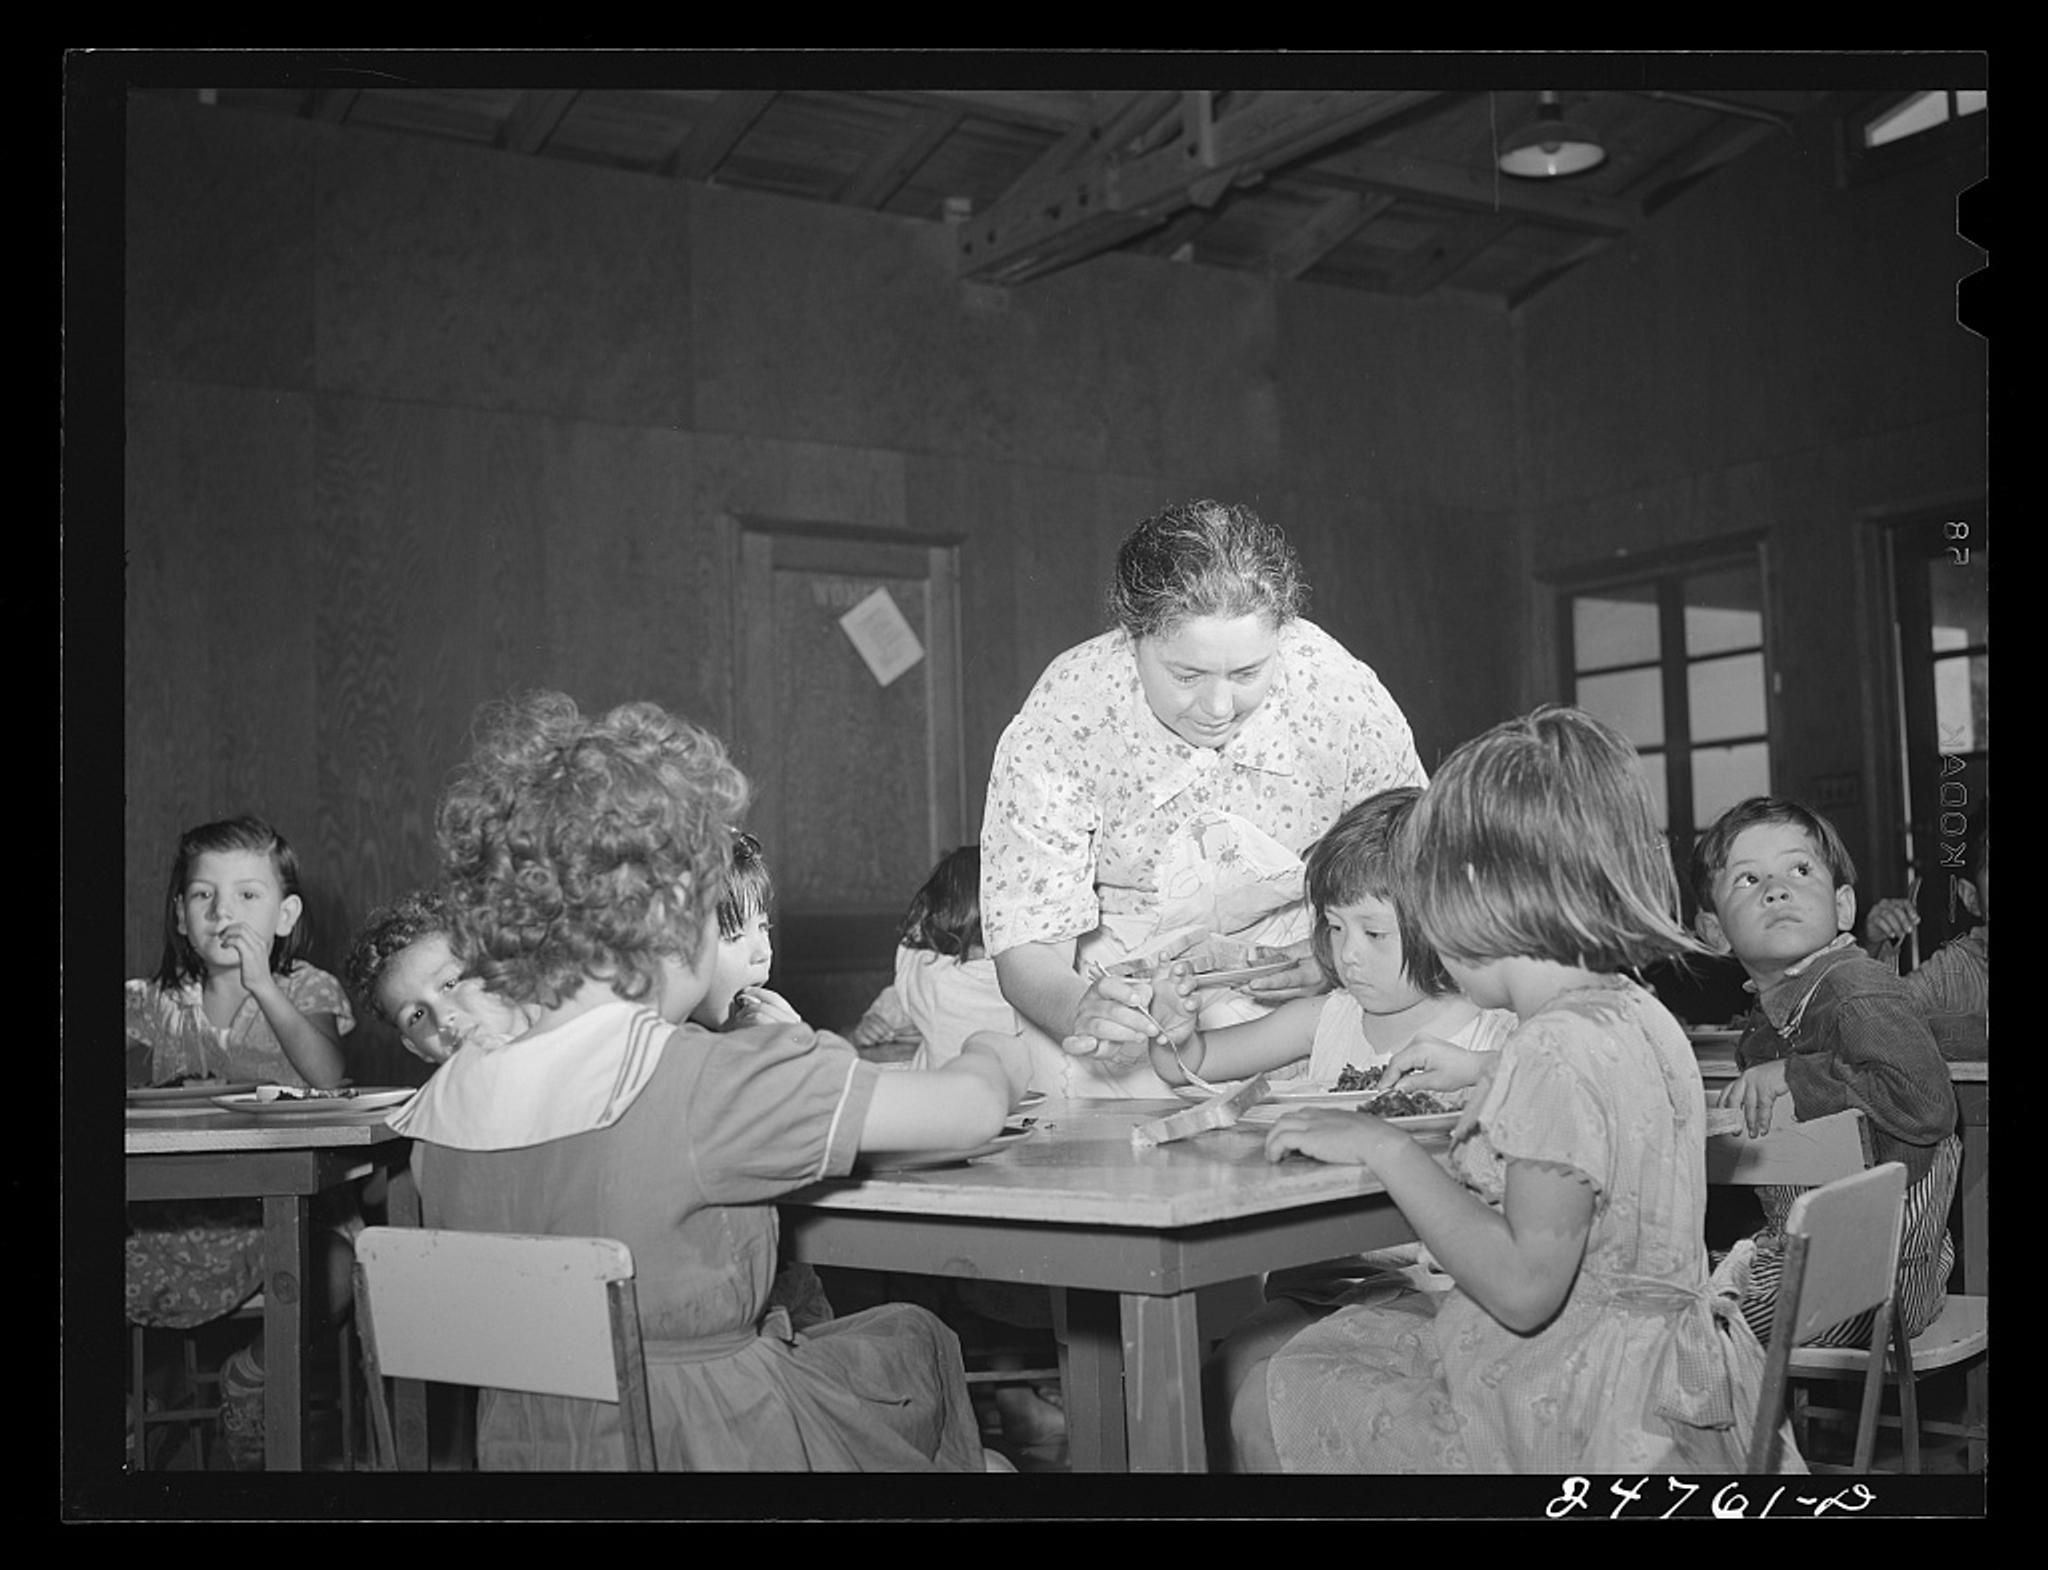 A black and white photo of children in old fashioned clothing sitting at tables being served food by a woman. (Source: Library of Congress)